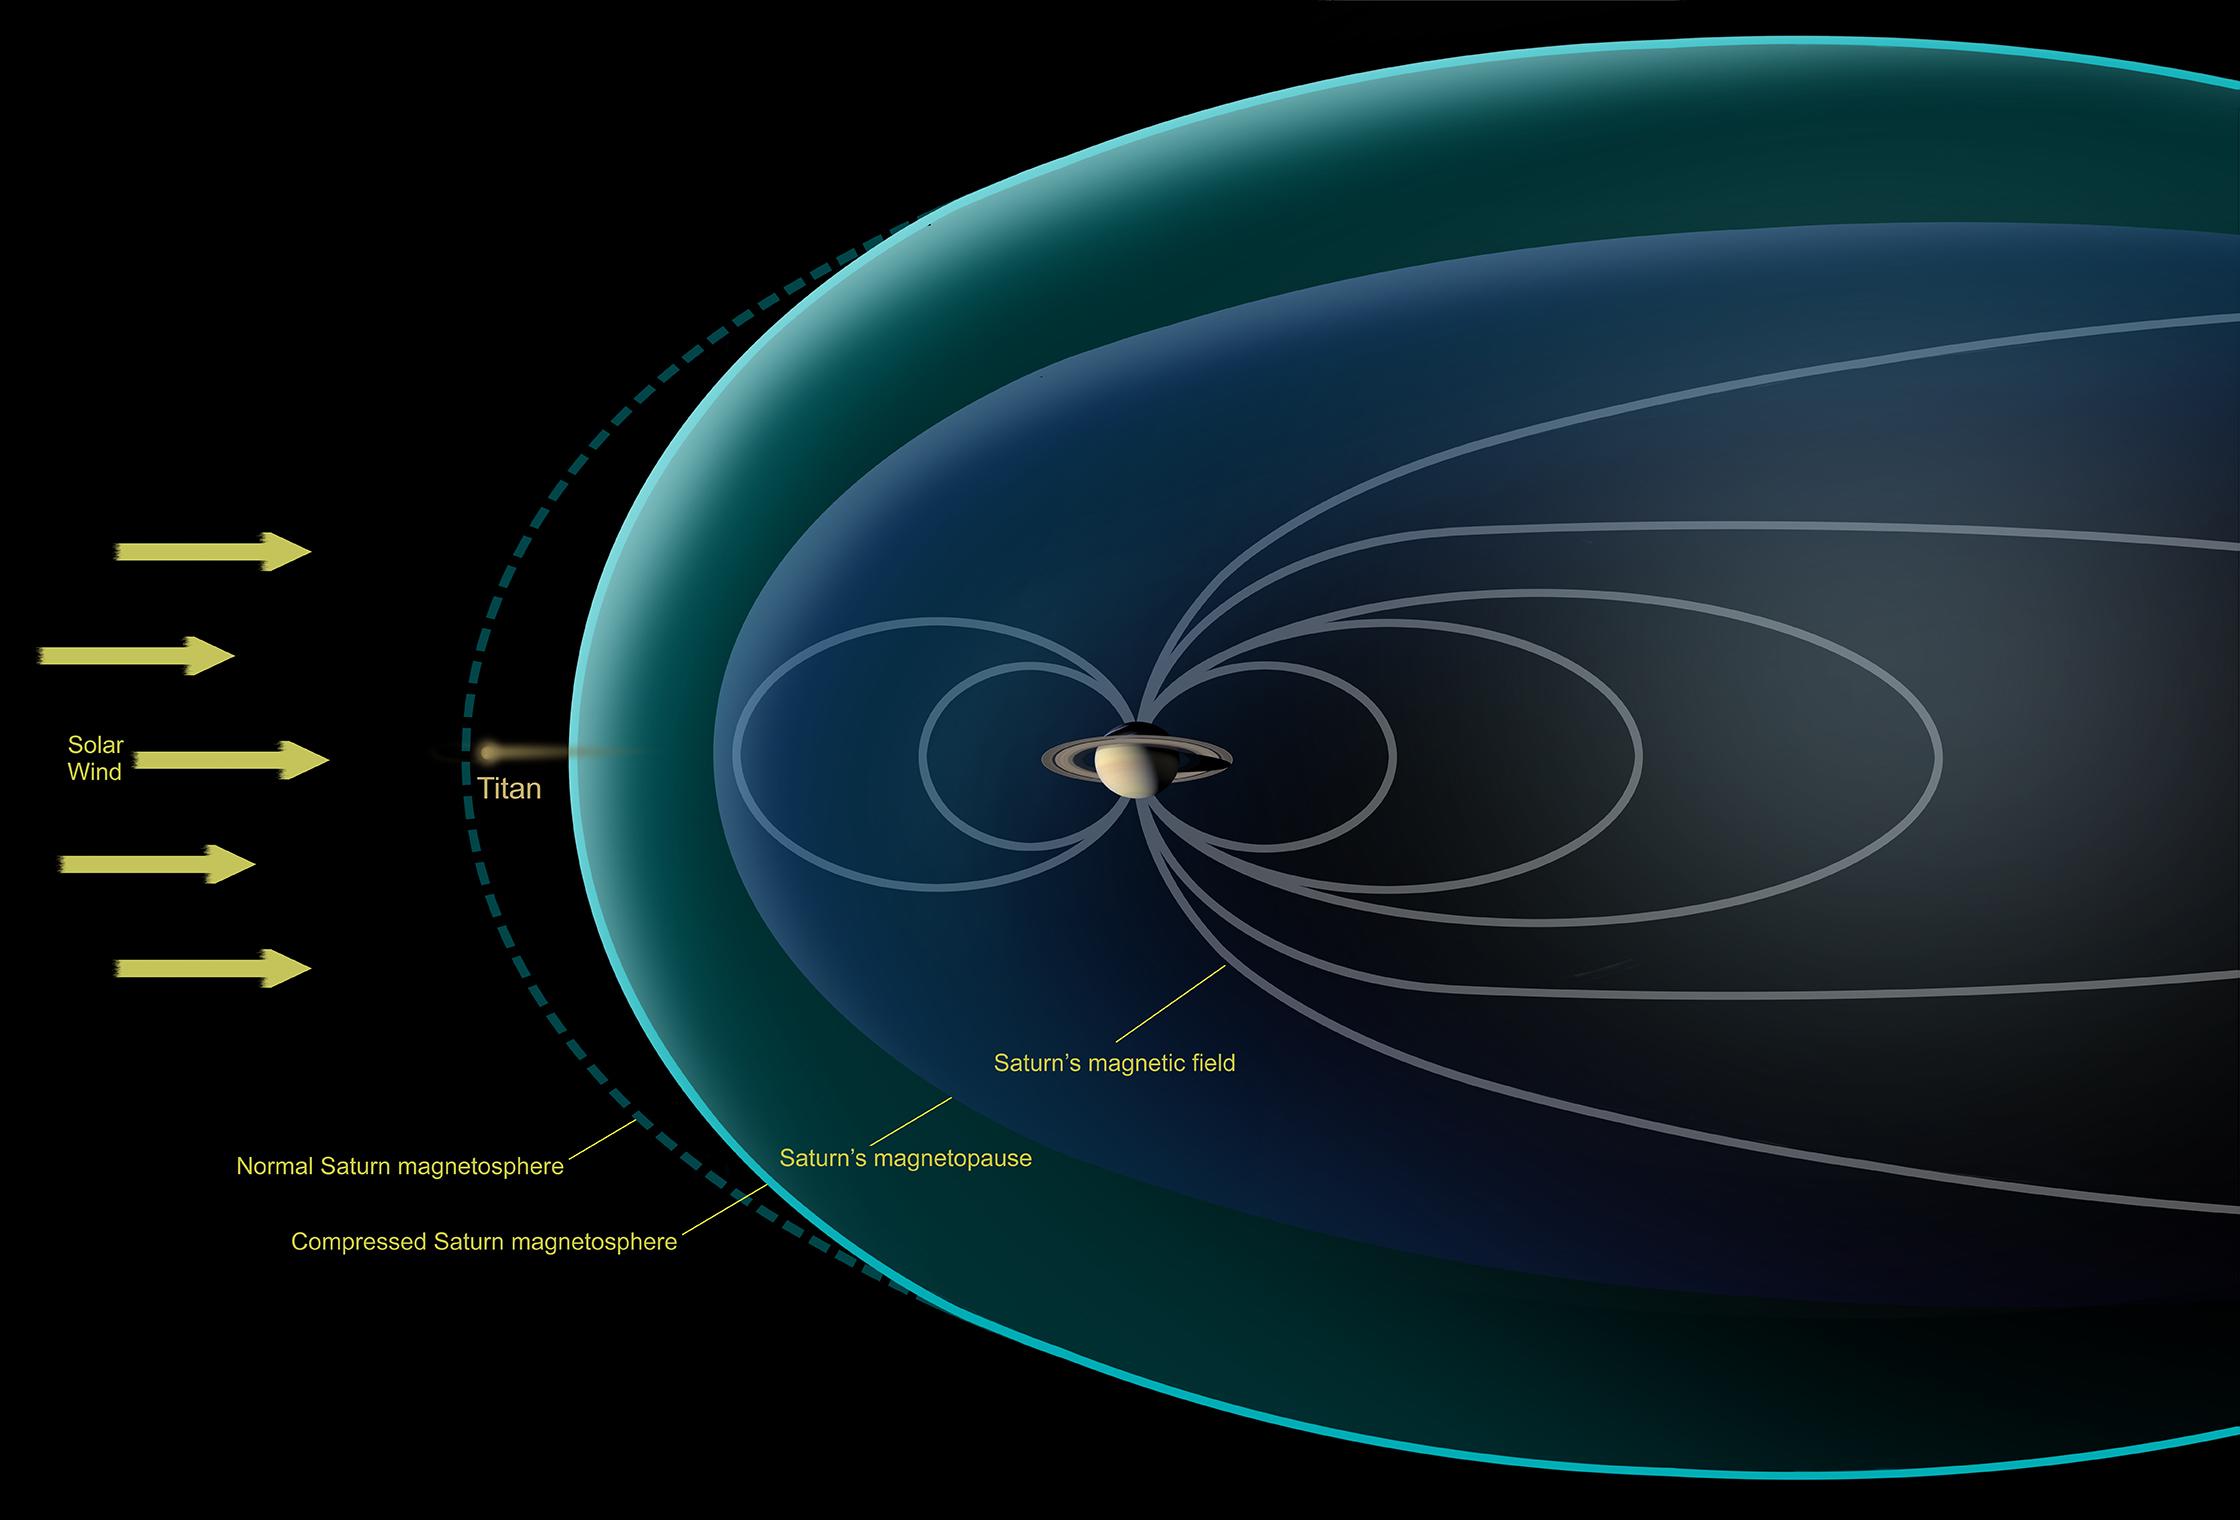 This diagram depicts conditions observed by NASA's Cassini spacecraft during a flyby in Dec. 2013, when Saturn's magnetosphere was highly compressed